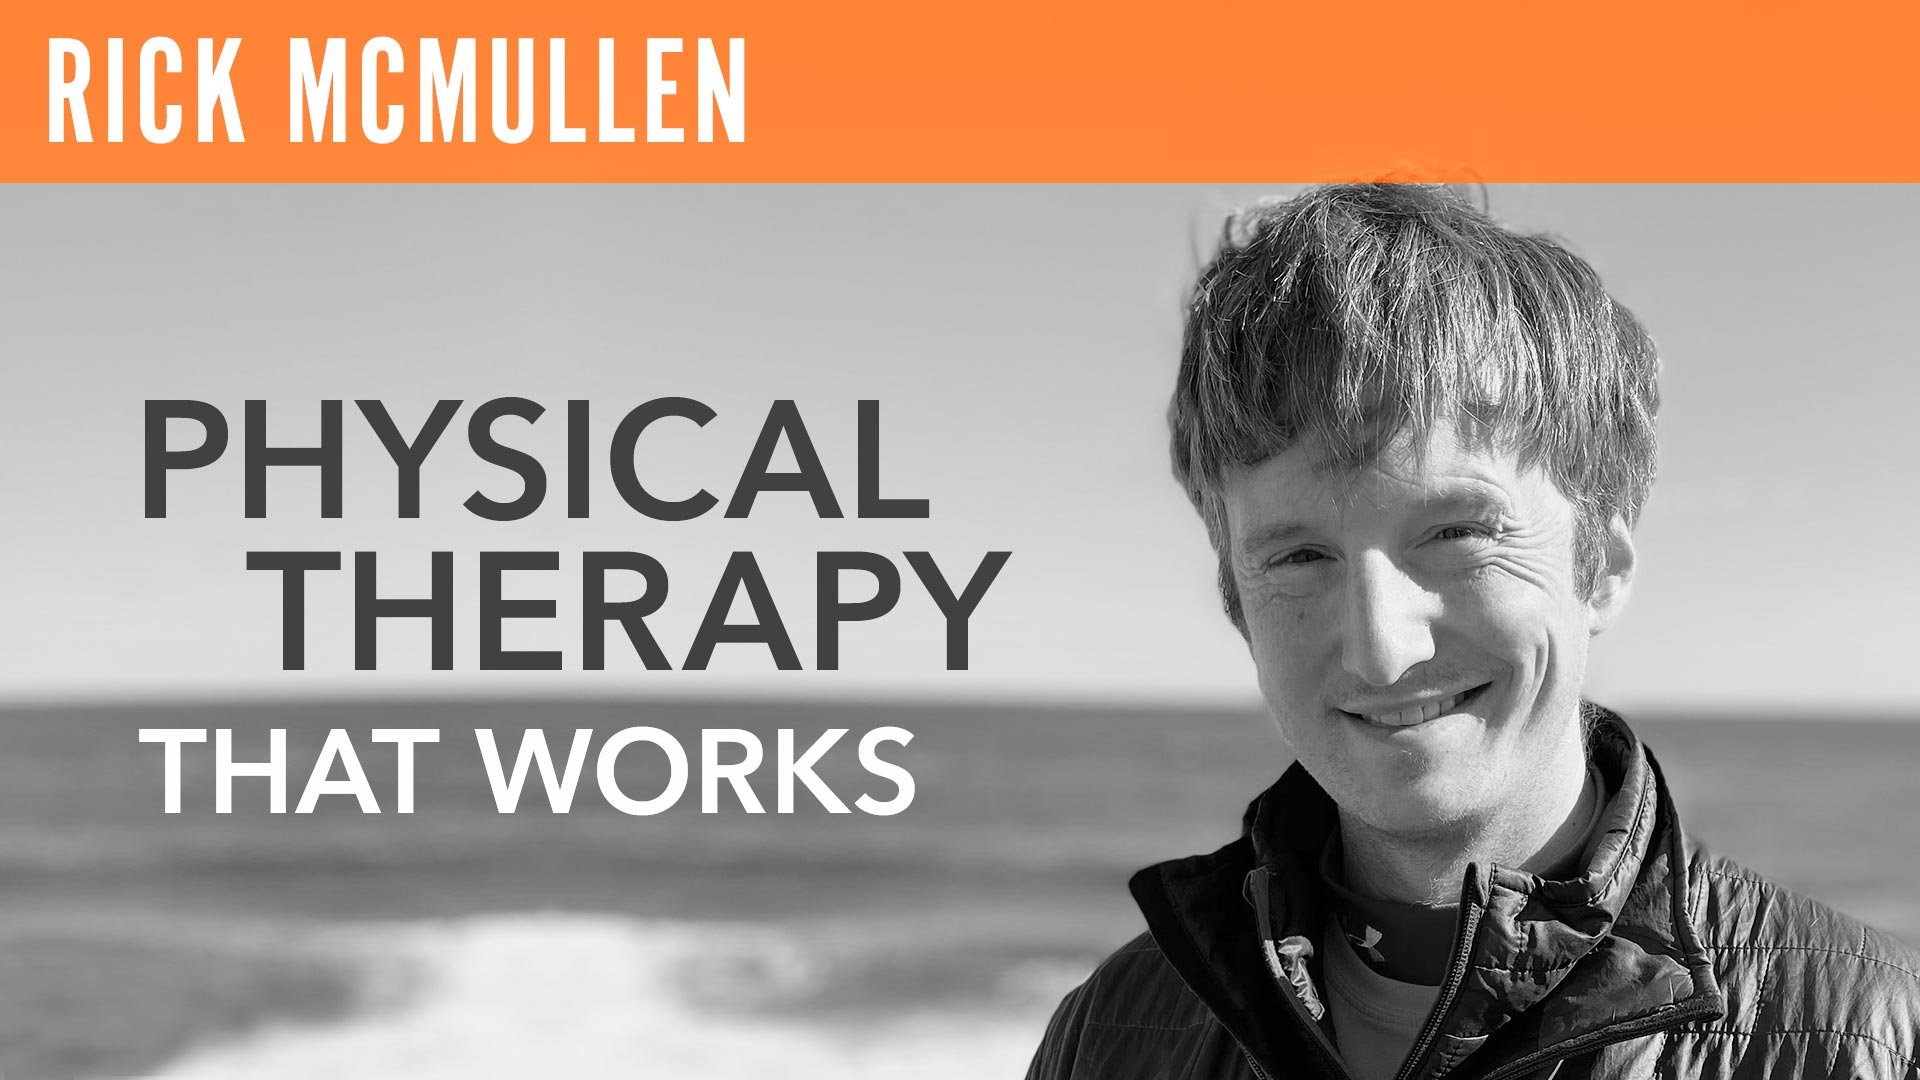 Rick McMullen, "Physical Therapy That Works"